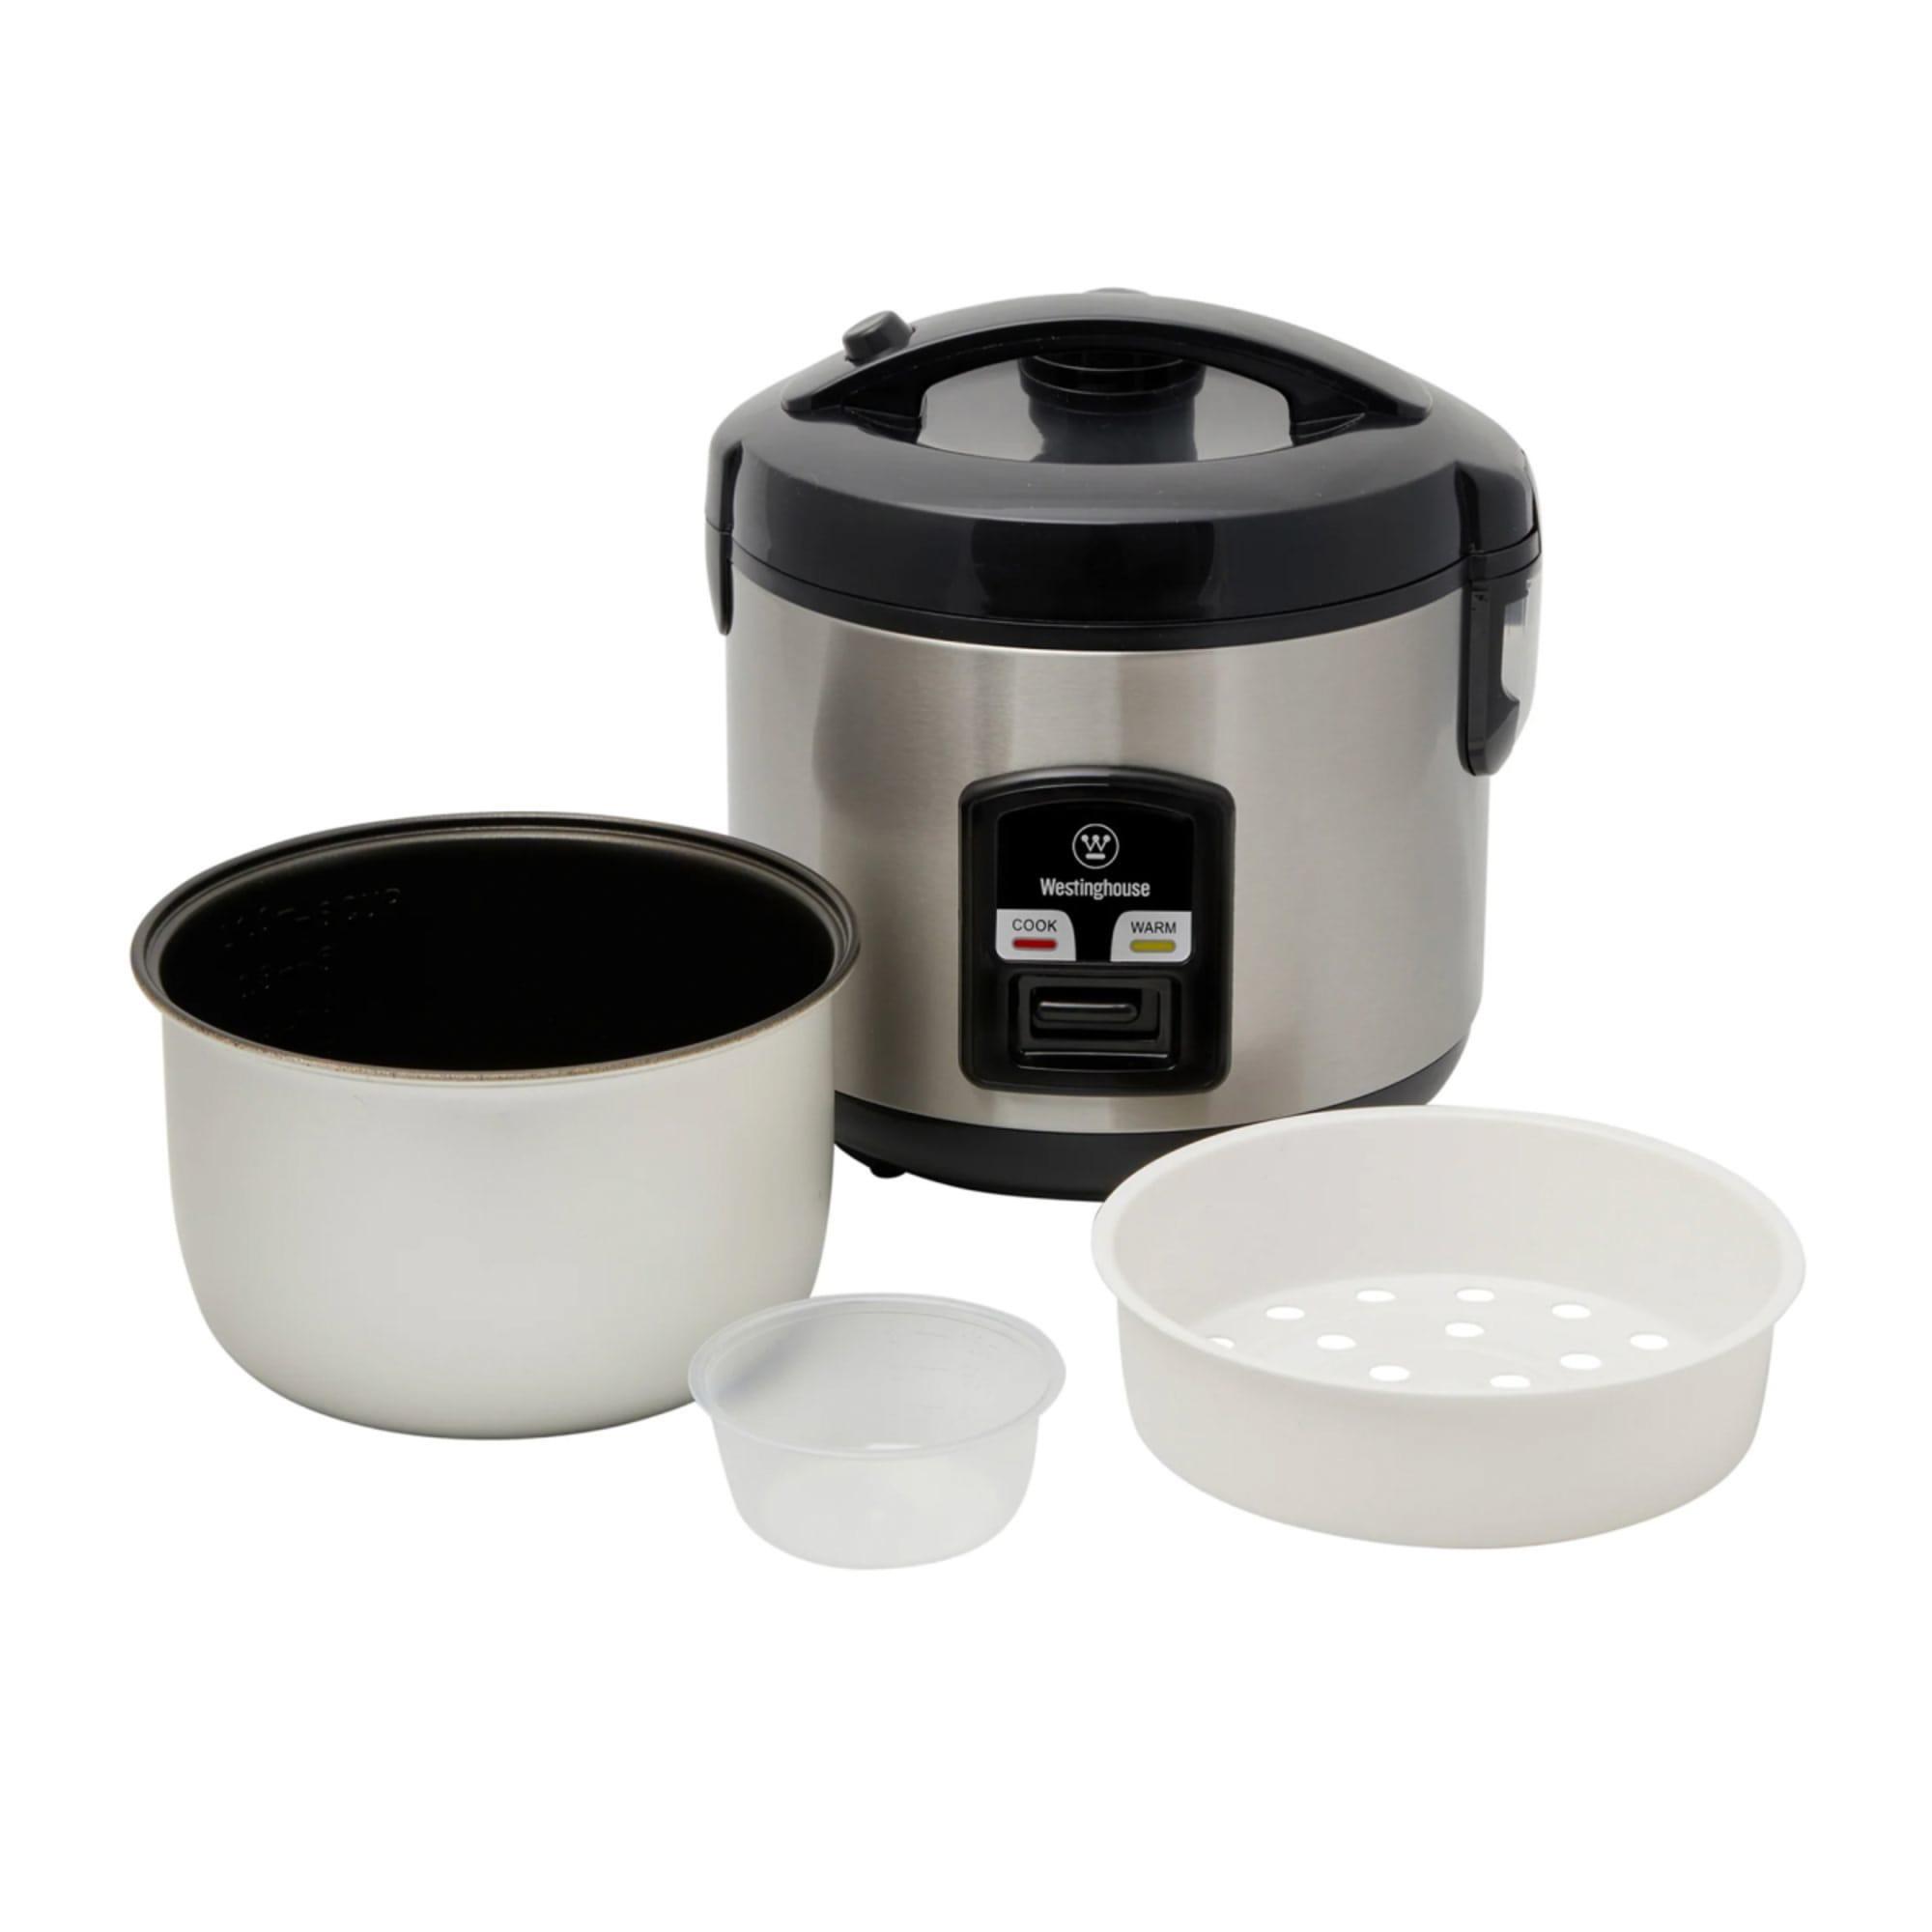 Westinghouse Rice Cooker 6 Cup Image 4